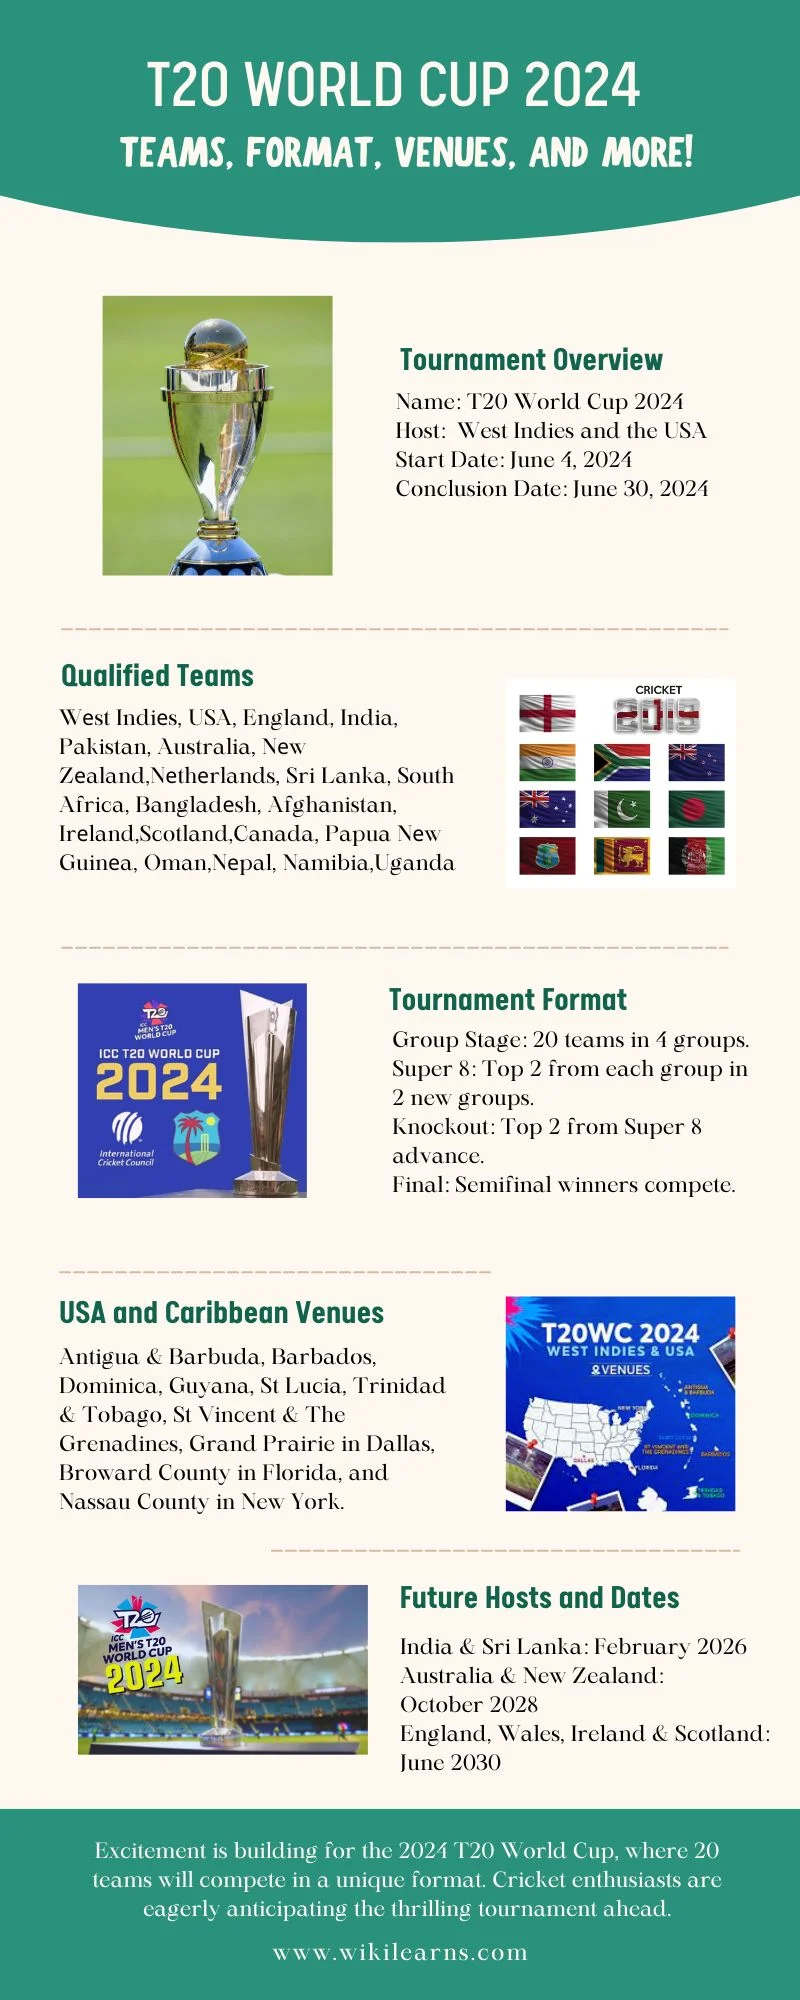 T20 World Cup 2024, Men's T20 World Cup 2024, Wikilearns